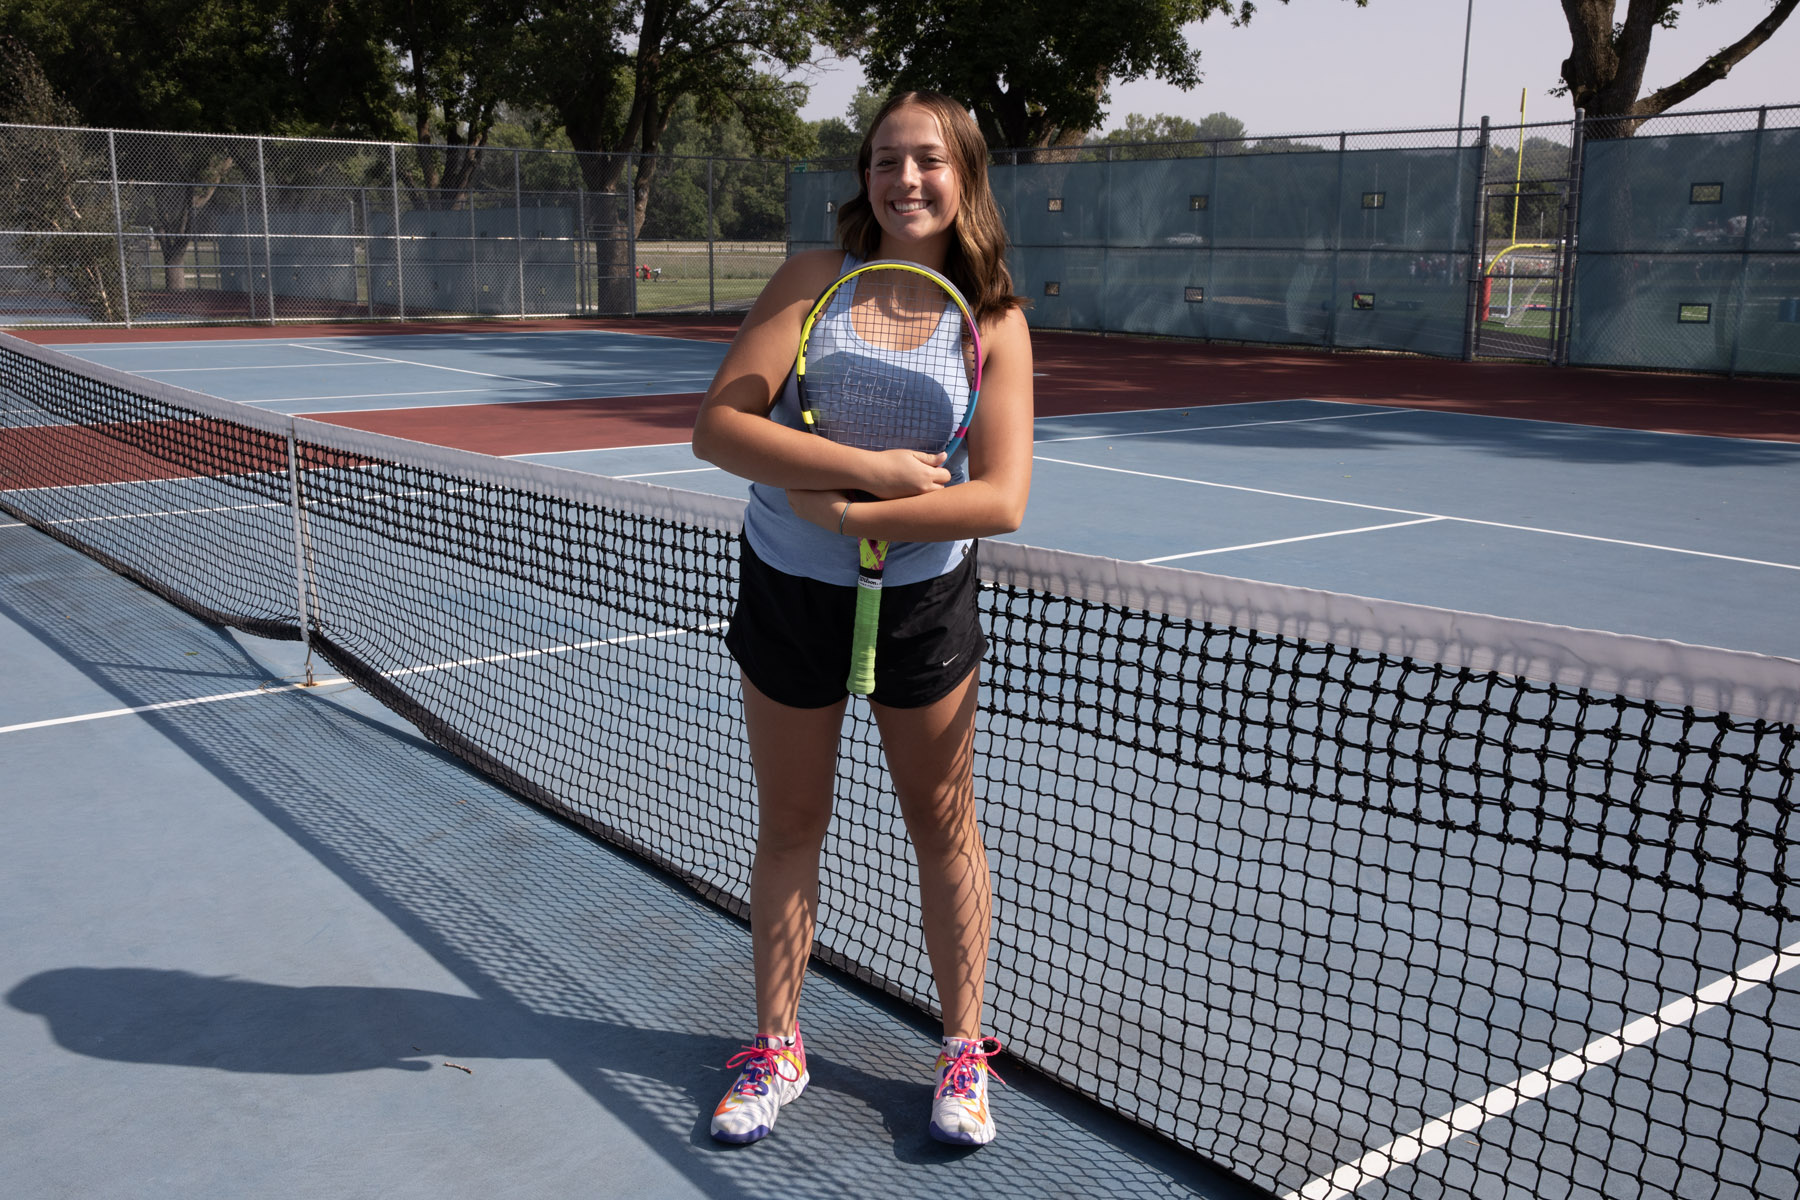 Julia Hedick is a sophomore member of the LHS girls tennis team (Used with permission by LHS Tennis).